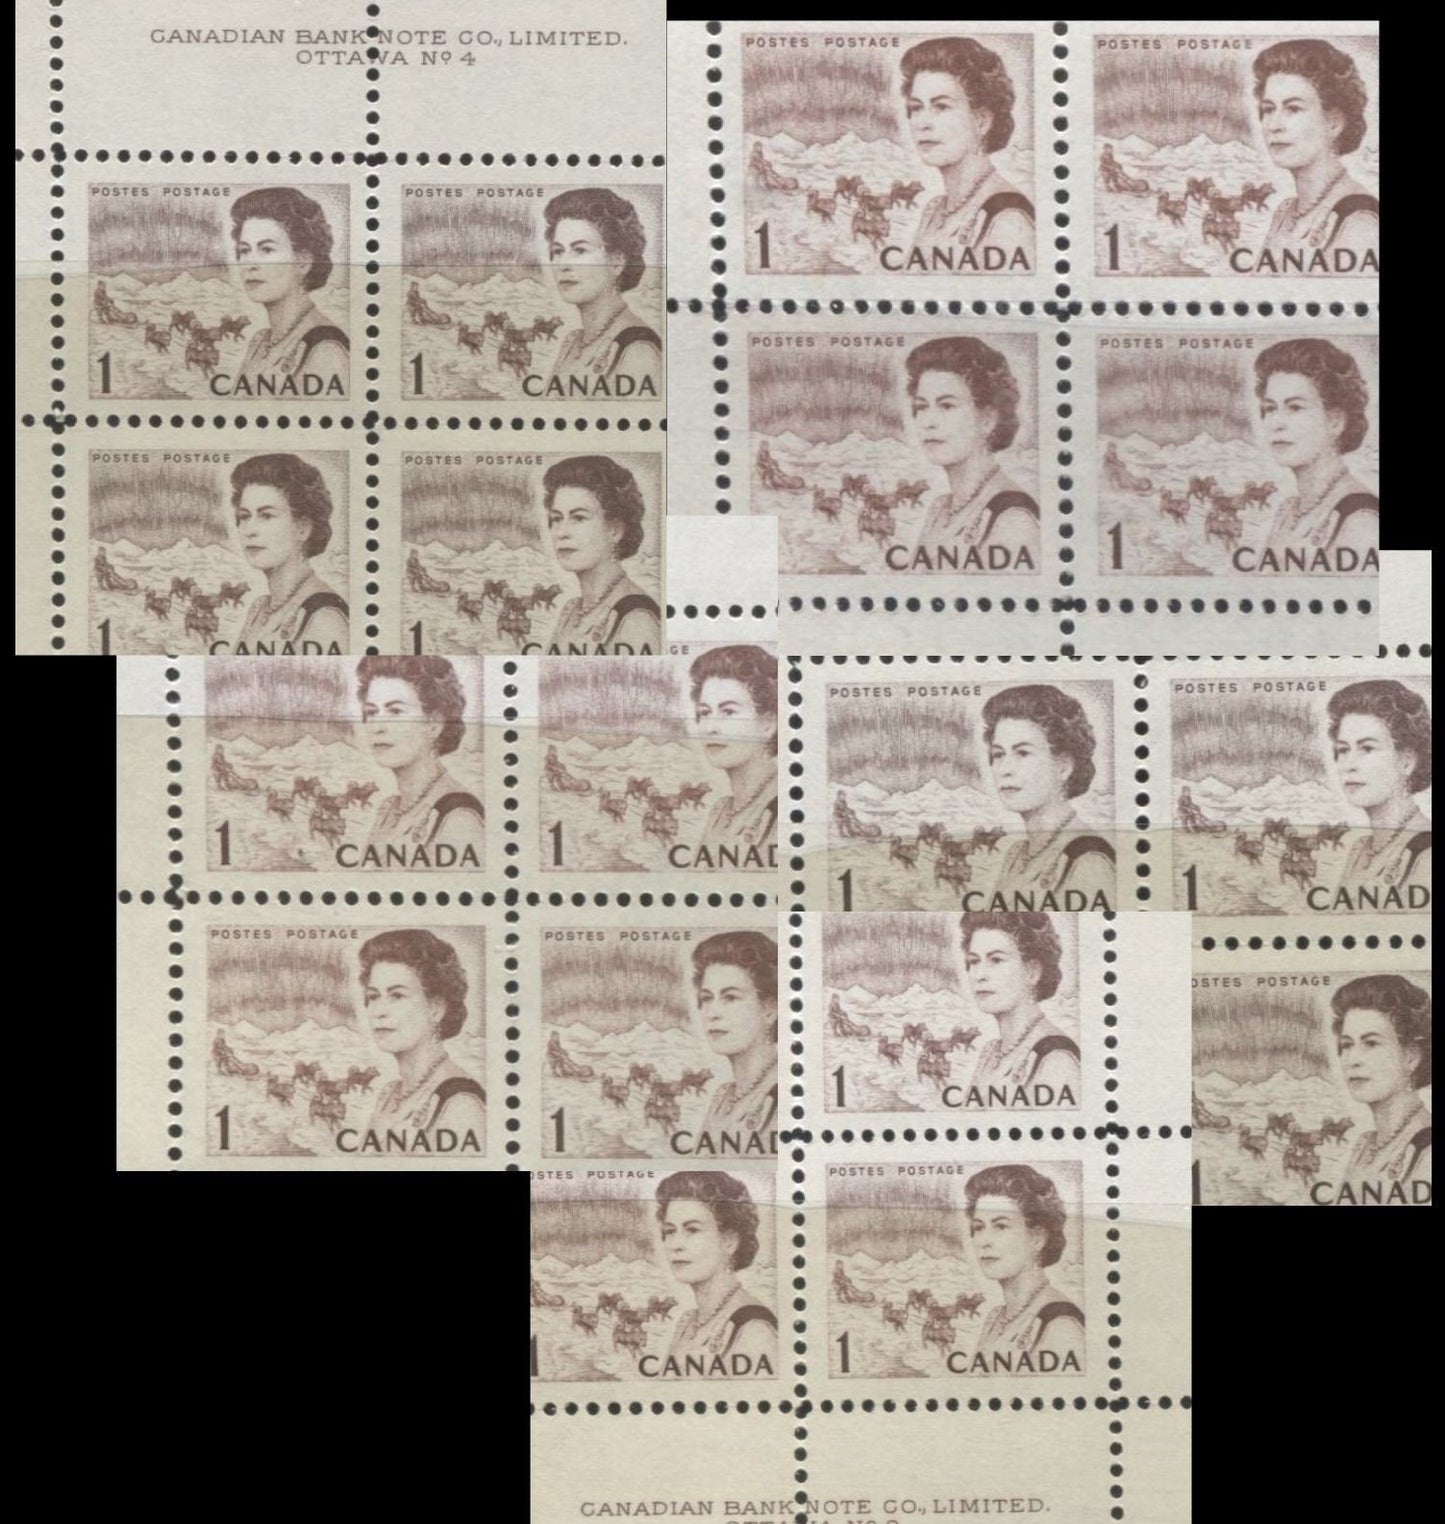 Lot #146 Canada #454piv 1c Reddish Brown, & Chocolate, Northern Lights and Dogsled Team, 1967-1973 Centennial Issue, A Specialized Lot of 3 WCB Upper Right Corner Blocks on Two Different LF-fl Papers, From Different Panes, PVA Gum